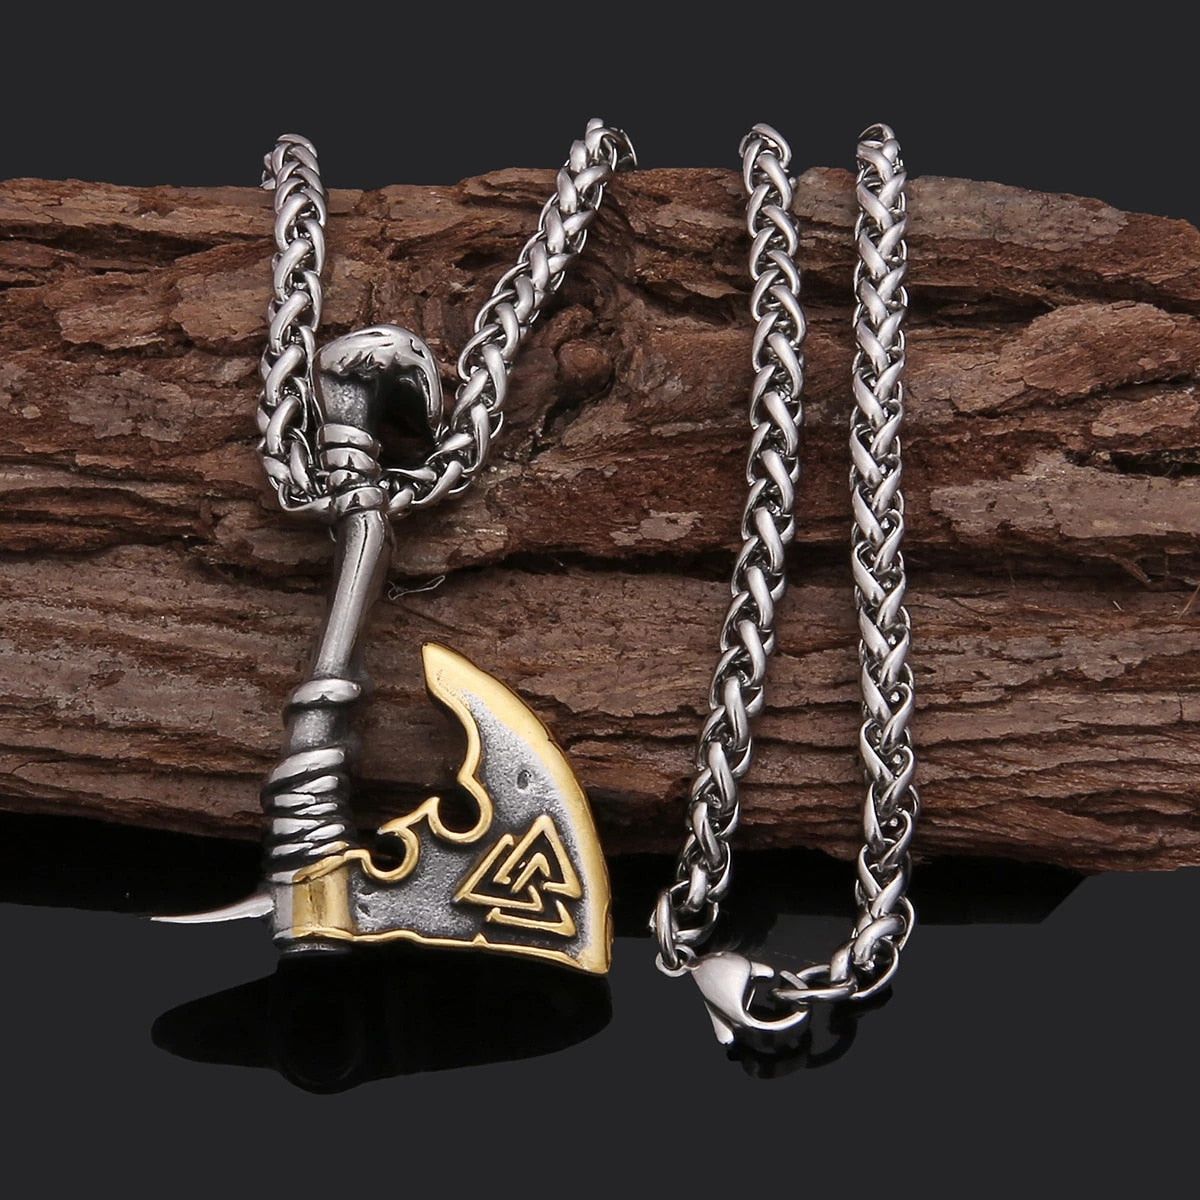 Nordic Viking Axe Necklace- Gold